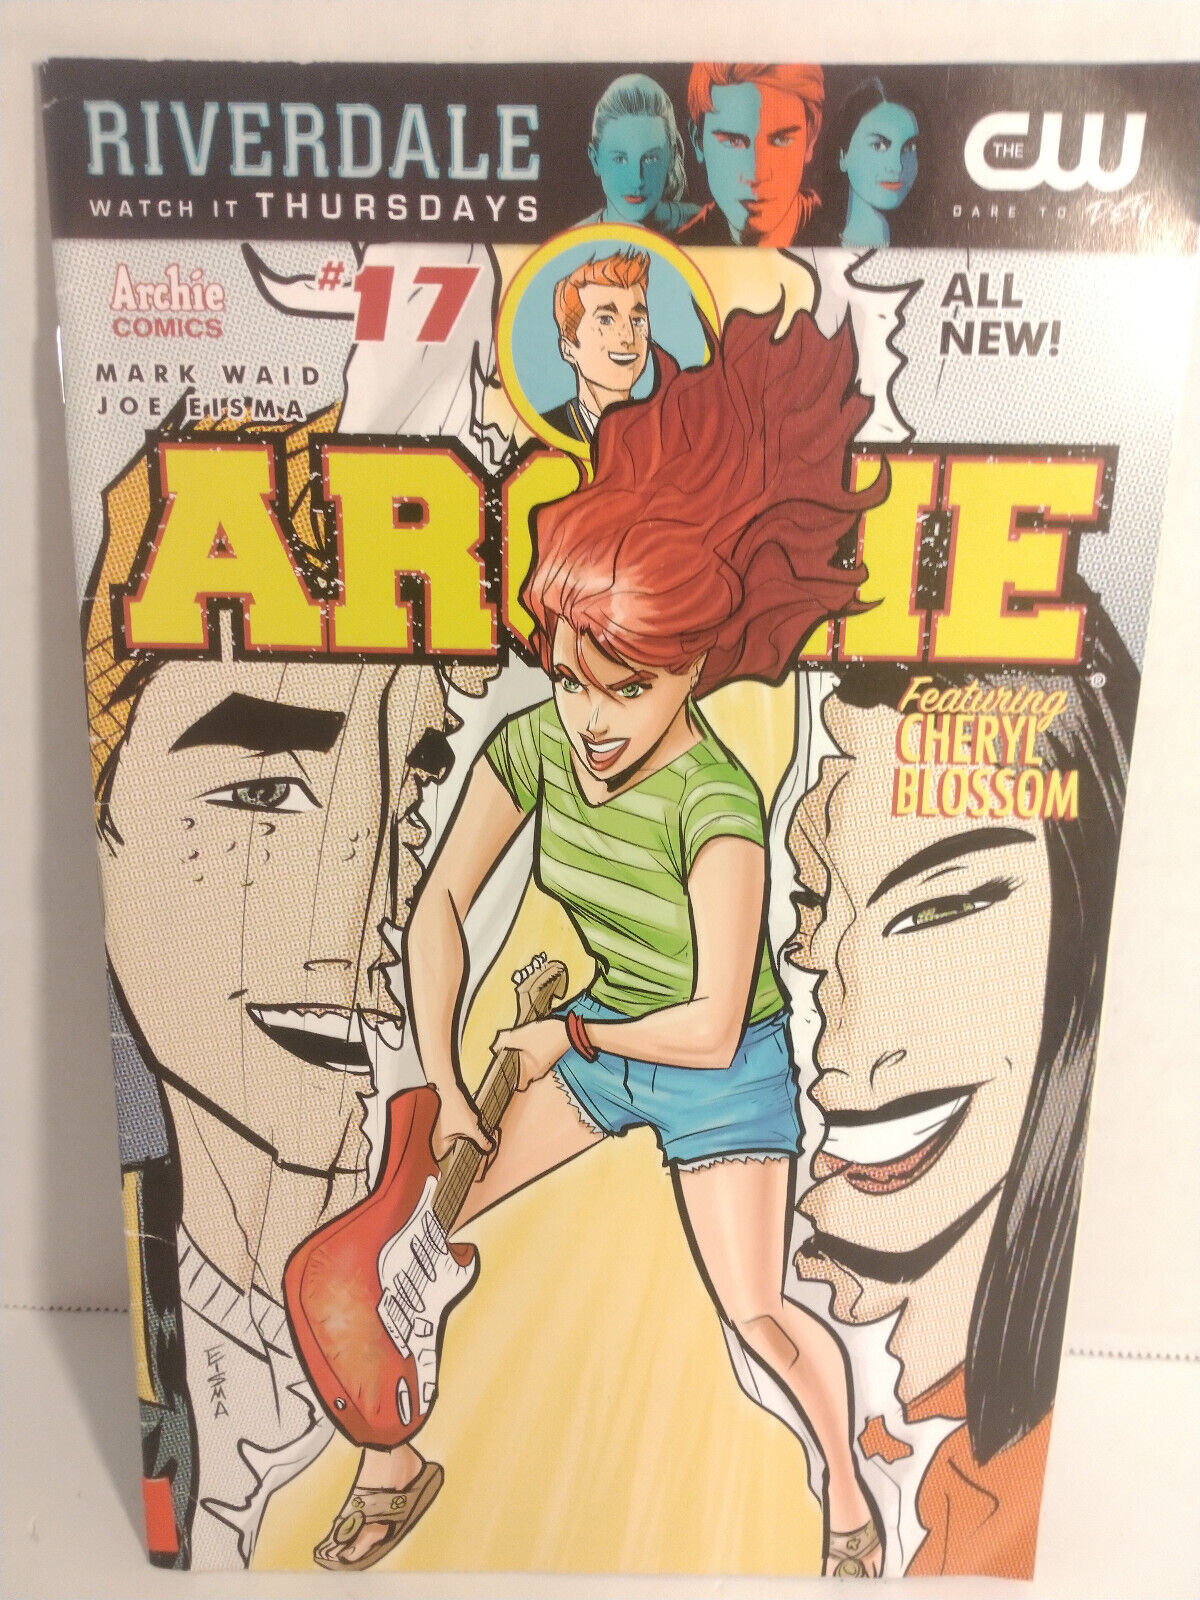 Primary image for Comic Archie Comics Volume 3 Issue #17 April 2017